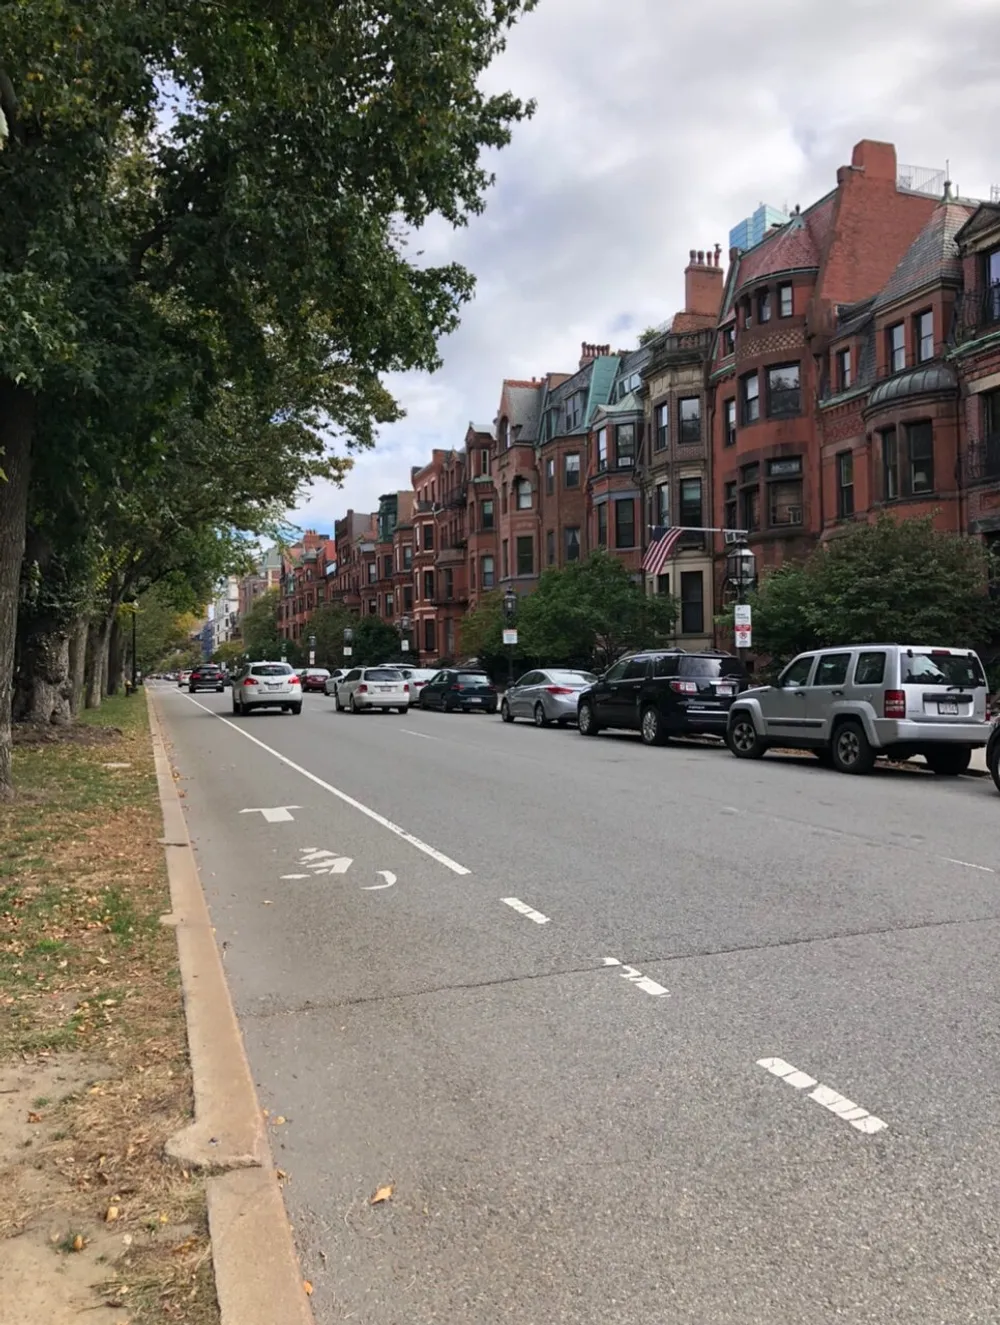 The image shows a tree-lined urban street with a row of parked cars and a series of red brick row houses on what appears to be a cloudy day